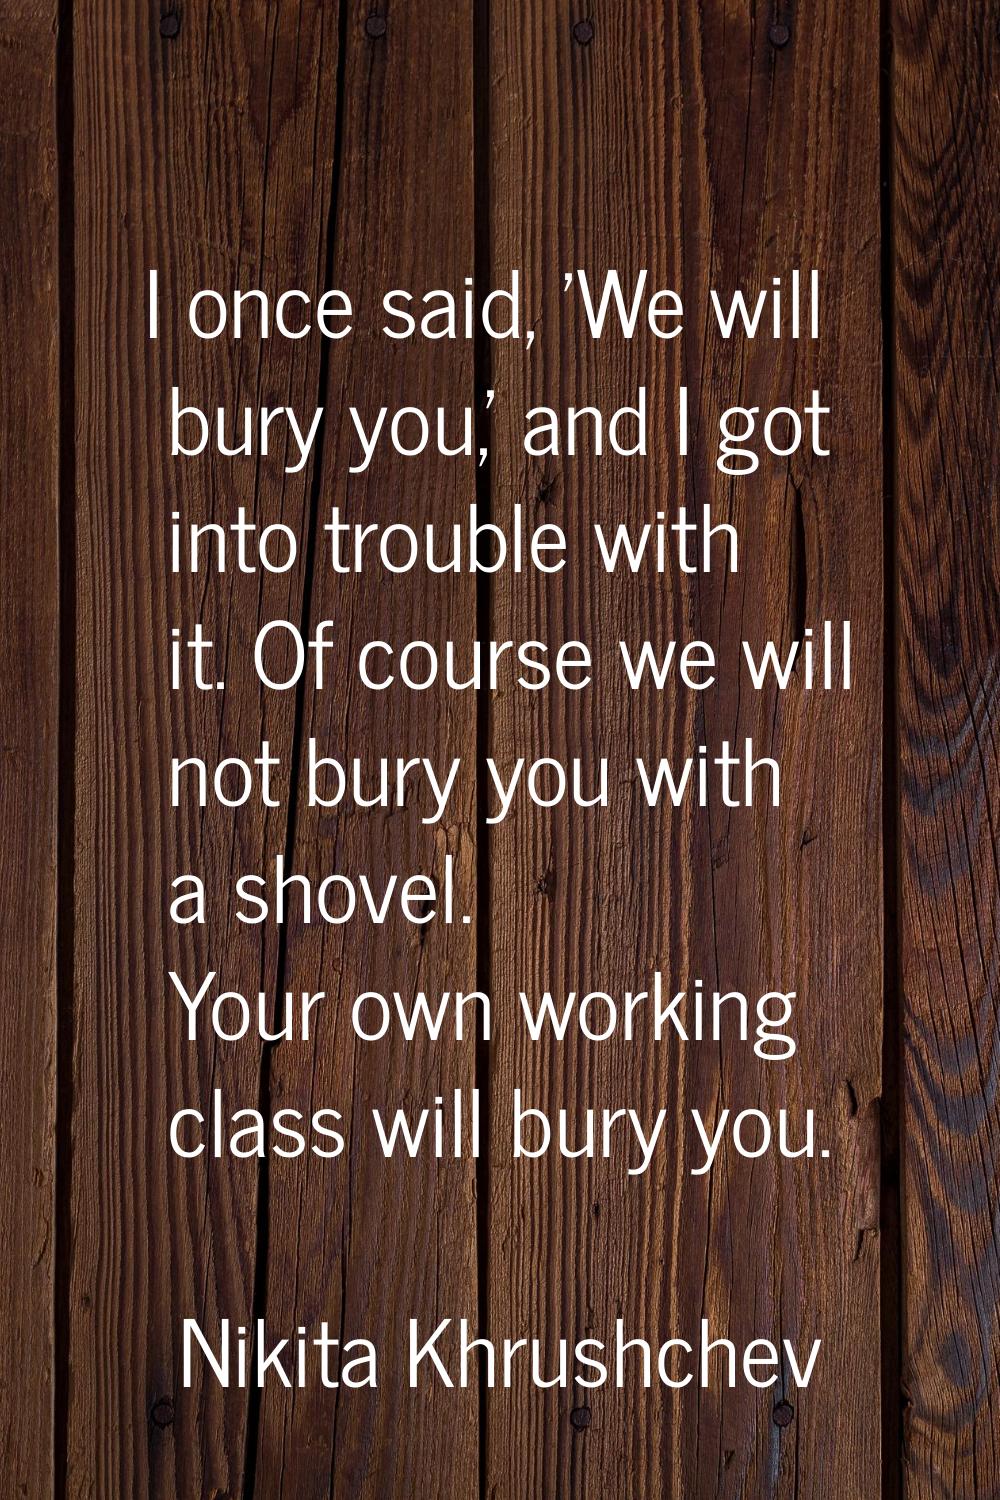 I once said, 'We will bury you,' and I got into trouble with it. Of course we will not bury you wit